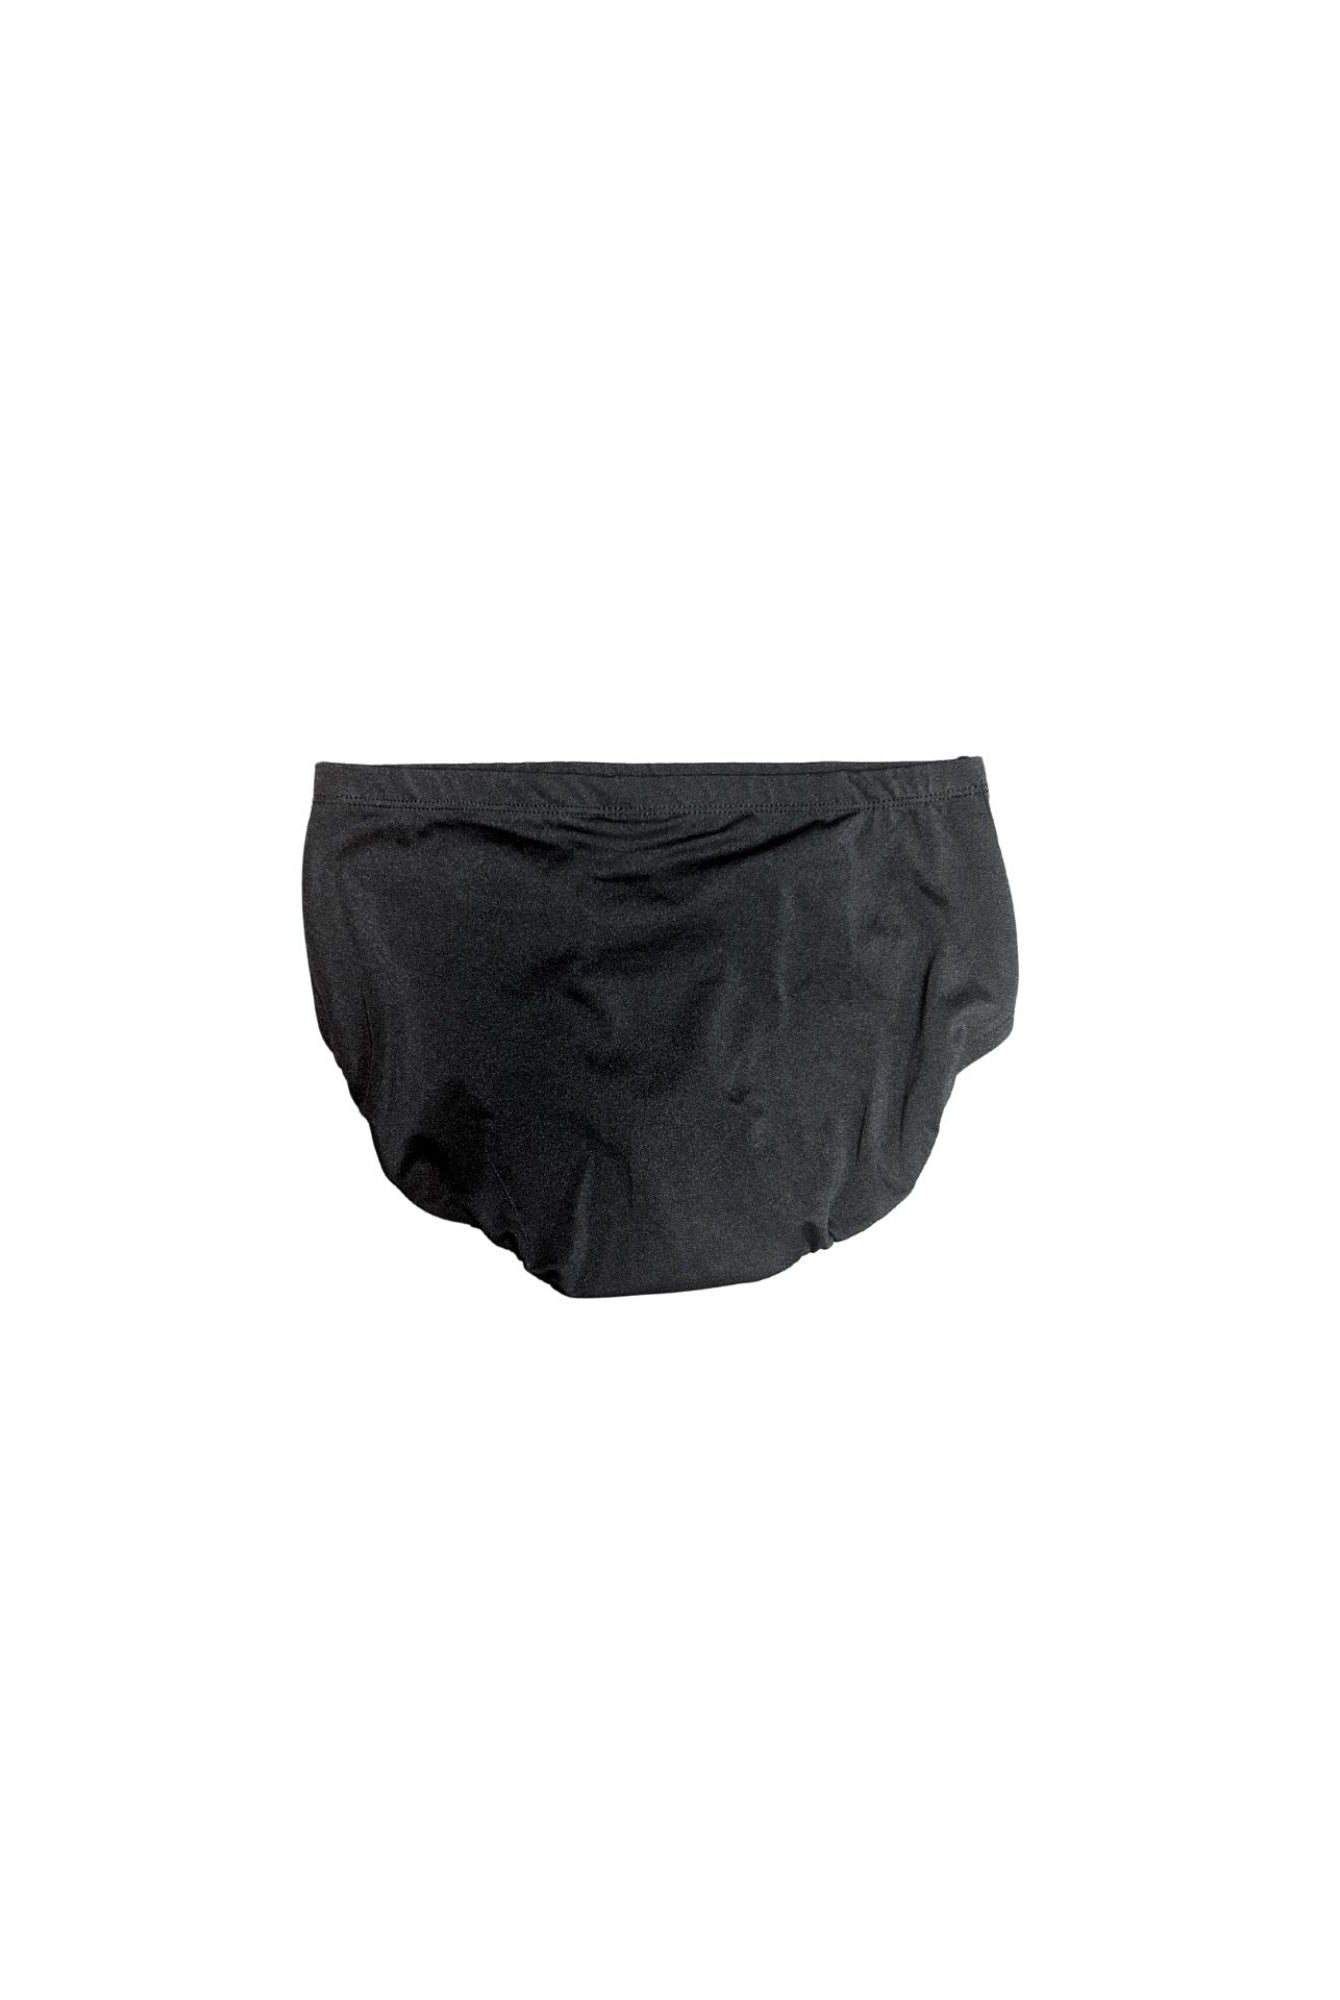 Body Wrappers P1015 Brief Black Back